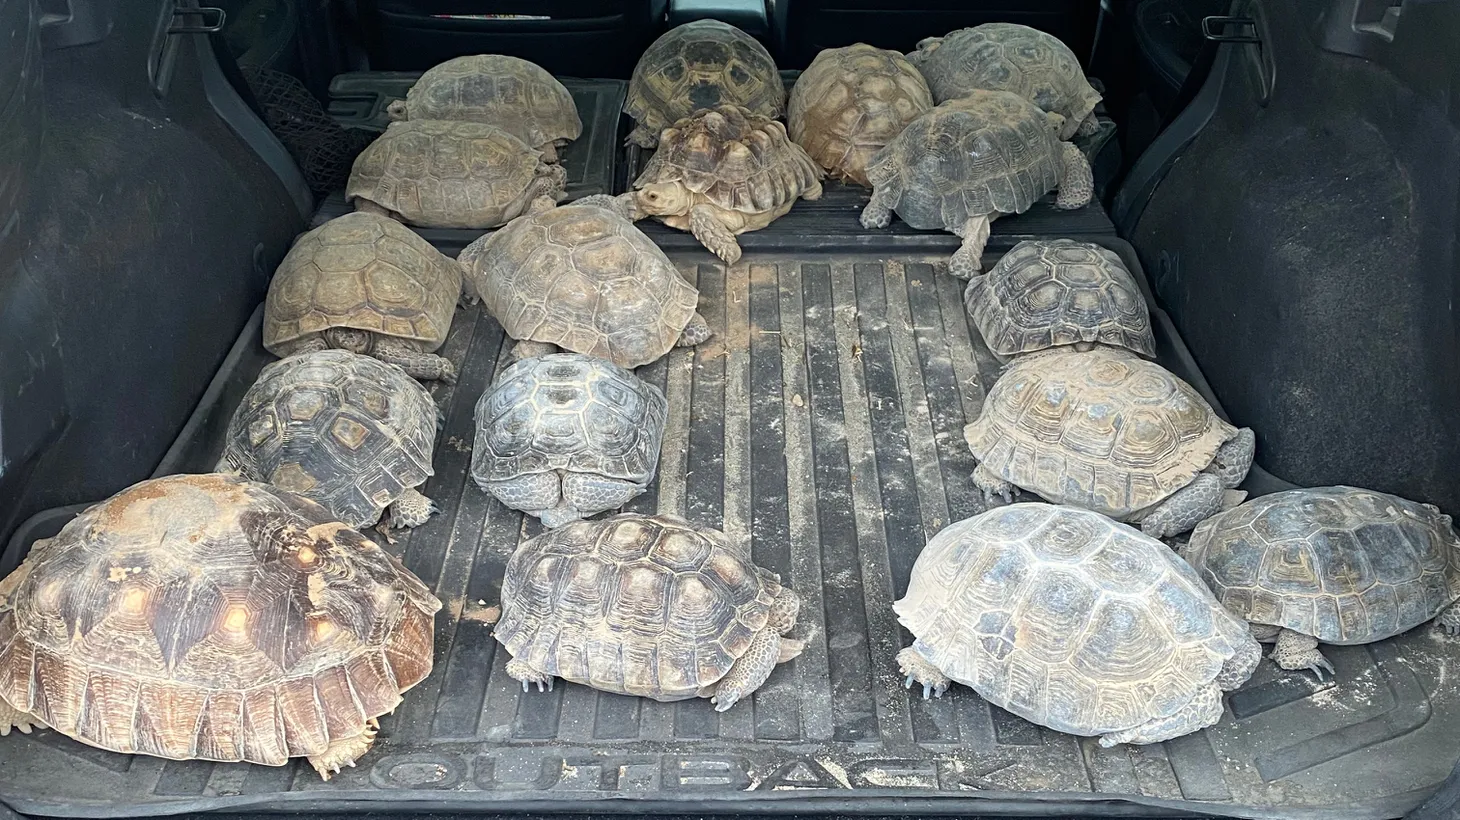 Neglected tortoises are being transported from the Joshua Tree Tortoise Rescue to Amy Keeler’s house.